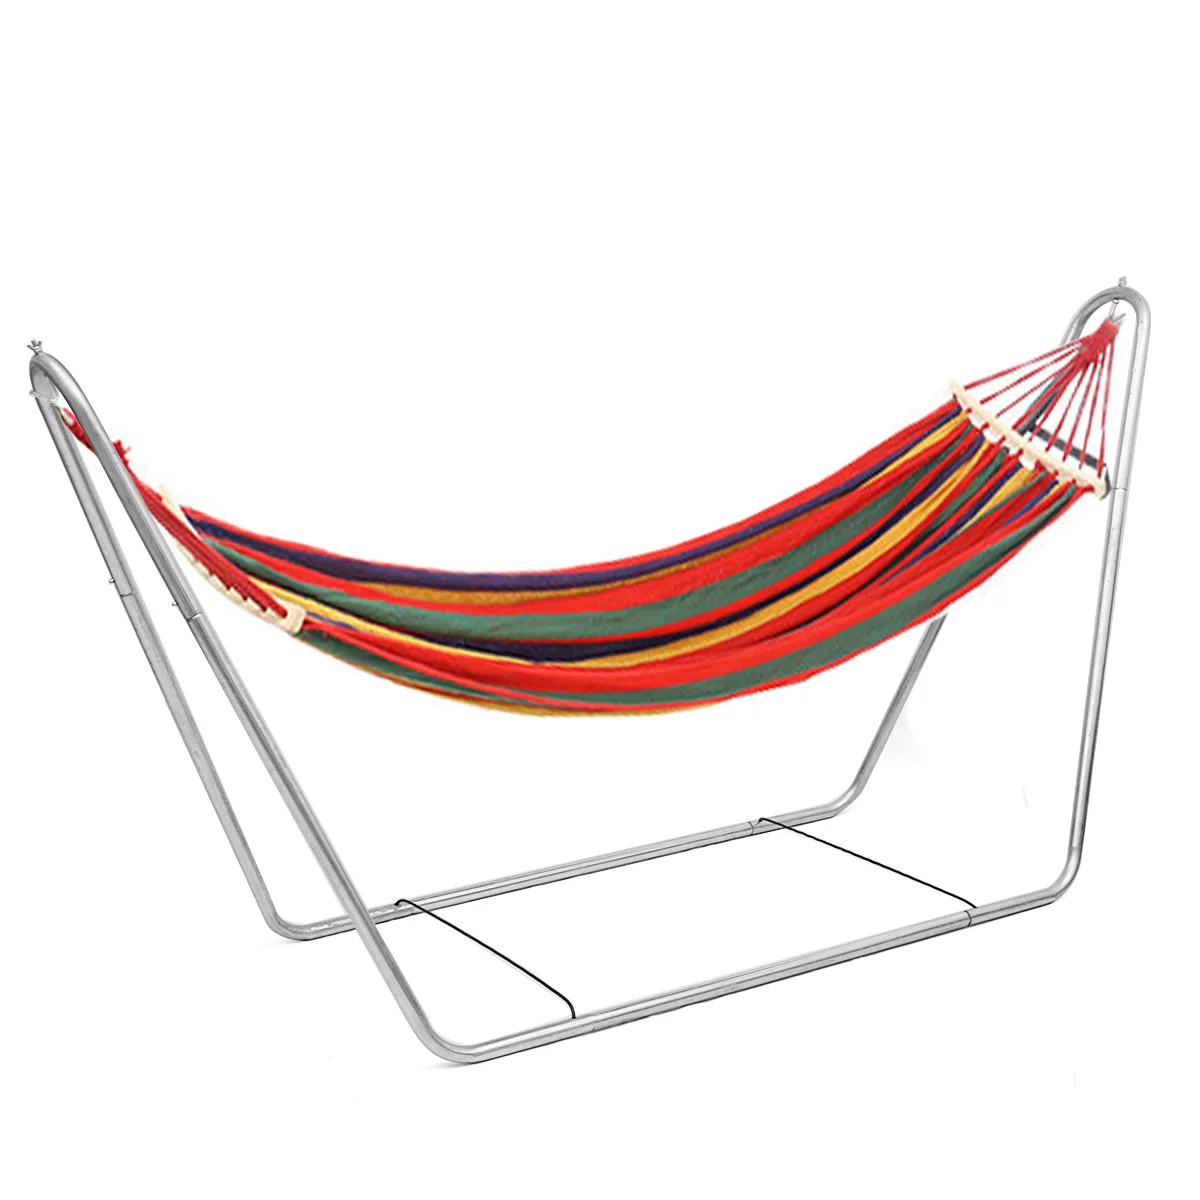 New Two-person Hammock Camping Thicken Swinging Chair Outdoor Hanging Bed Canvas Rocking Chair with Hammock Stand 200*150cm